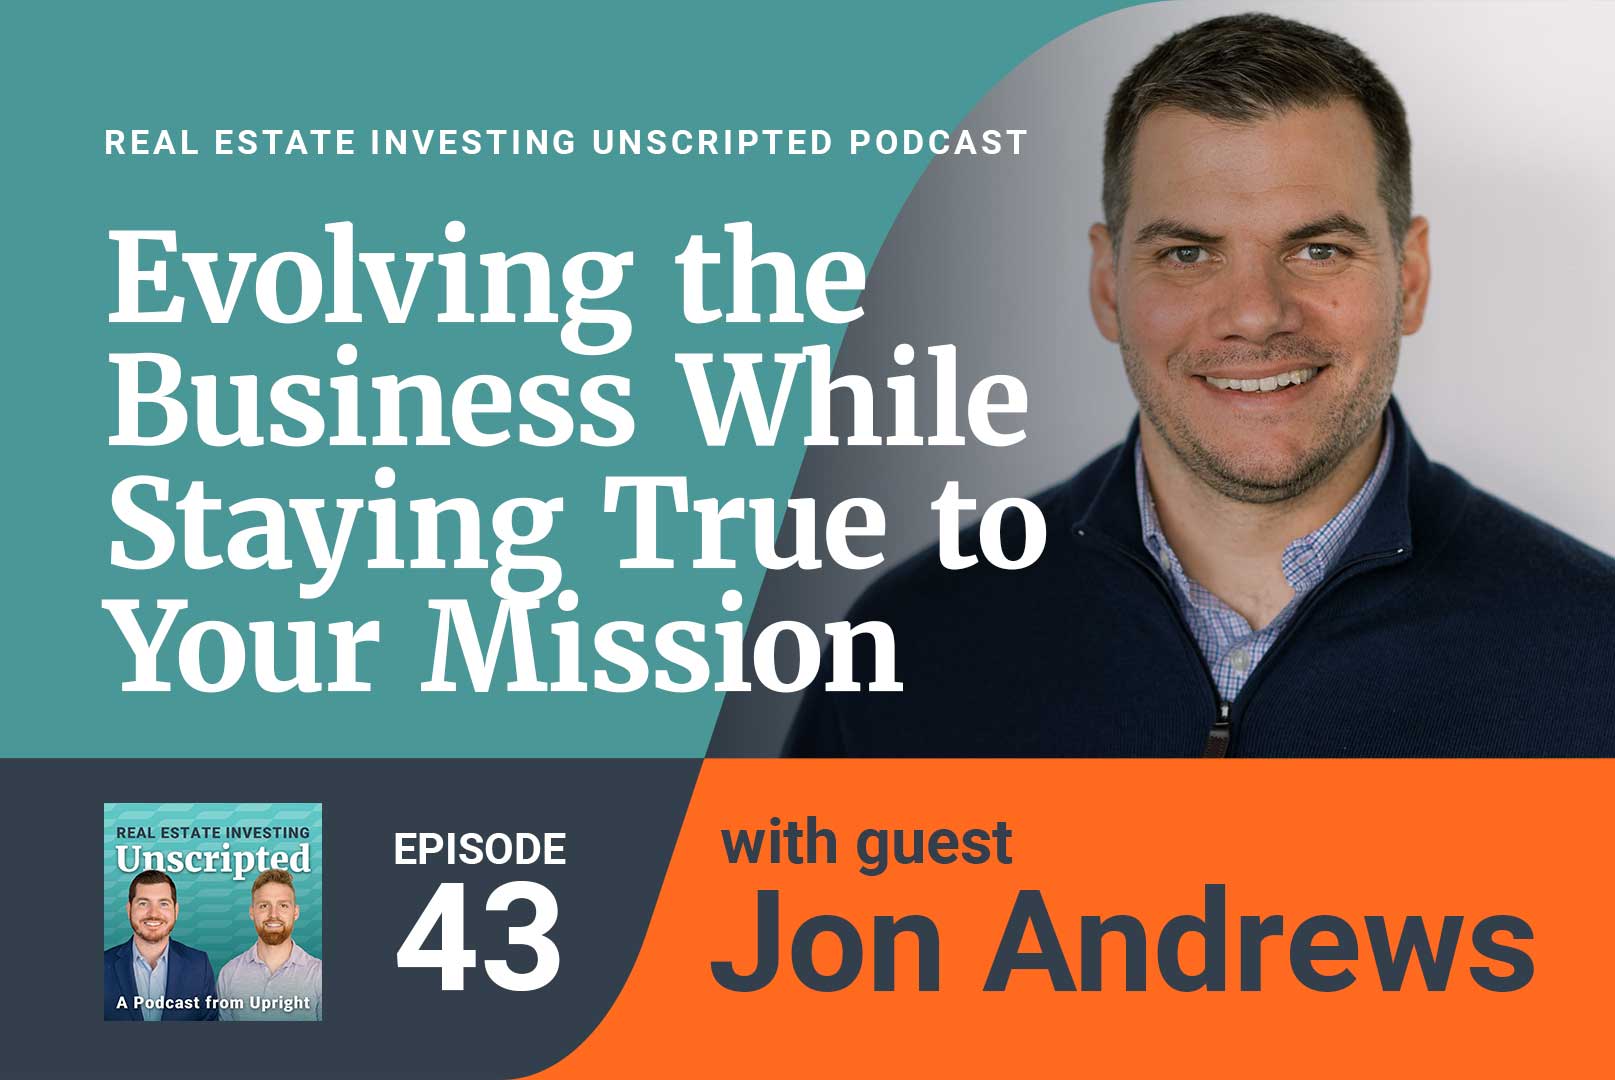  Evolving the Business While Staying True to Your Mission with Jon Andrews, Upright COO